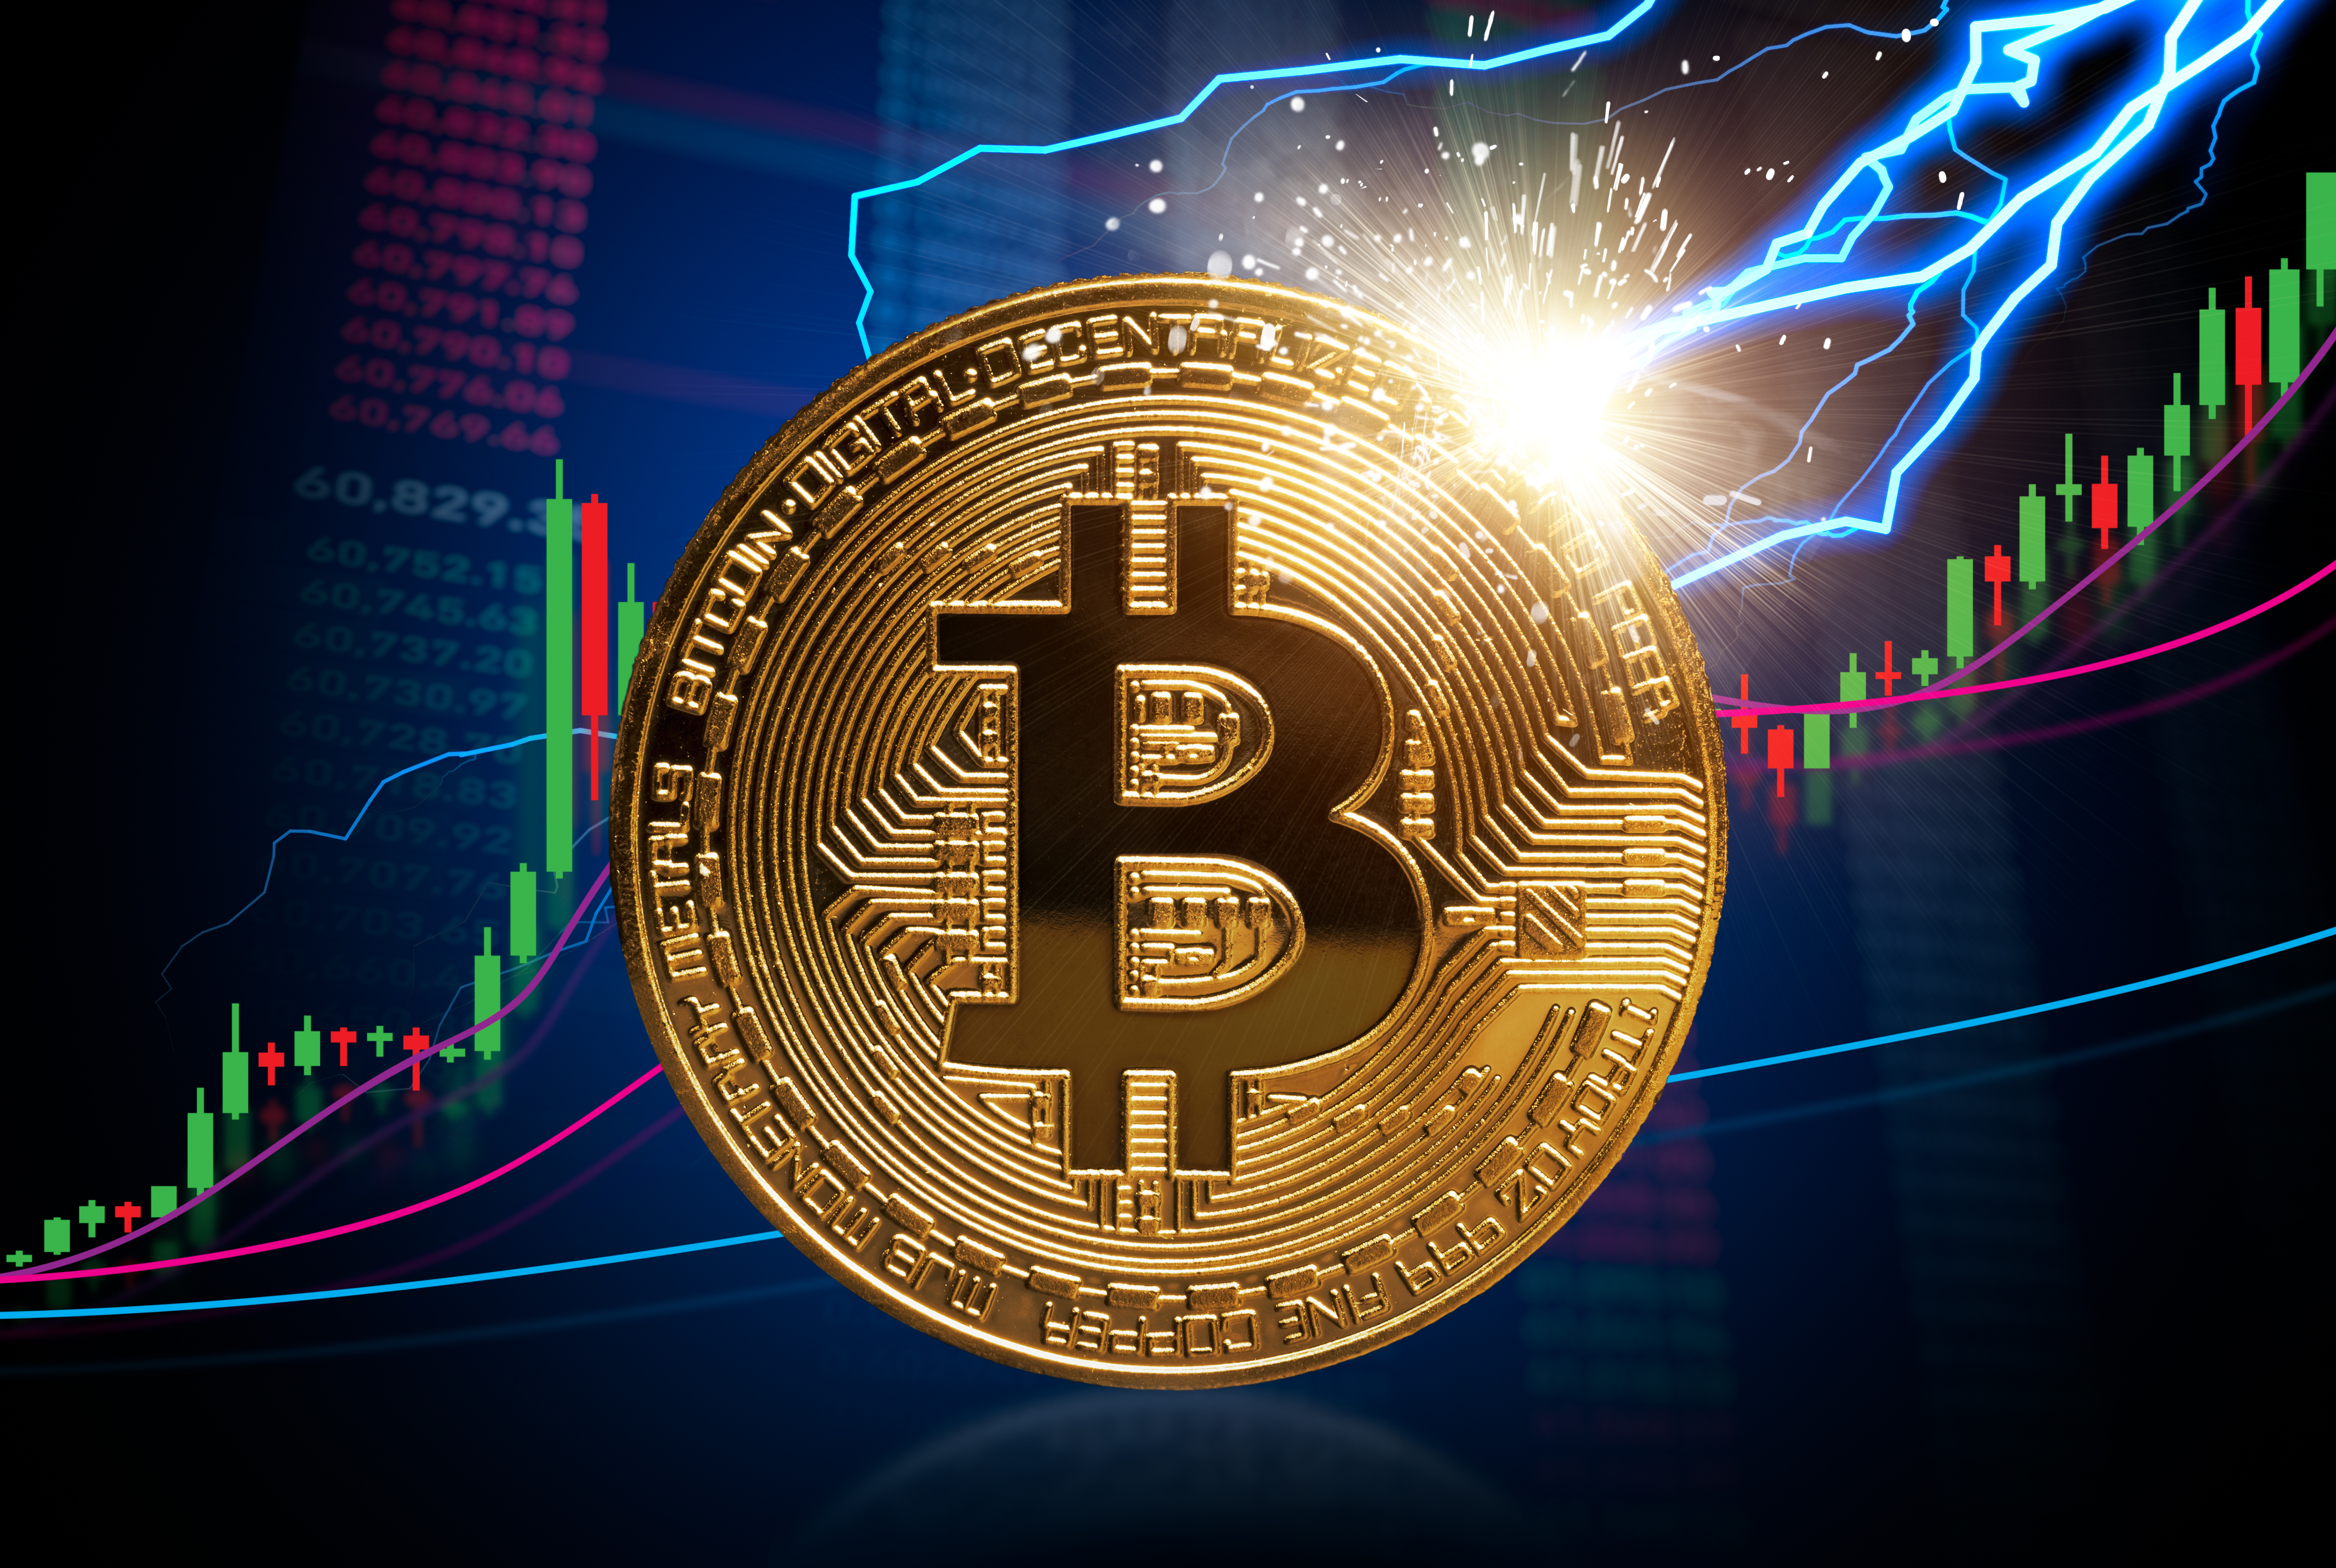 bitcoin-price-pumps-back-to-usd21k-as-whales-make-moves-and-dollar-slides